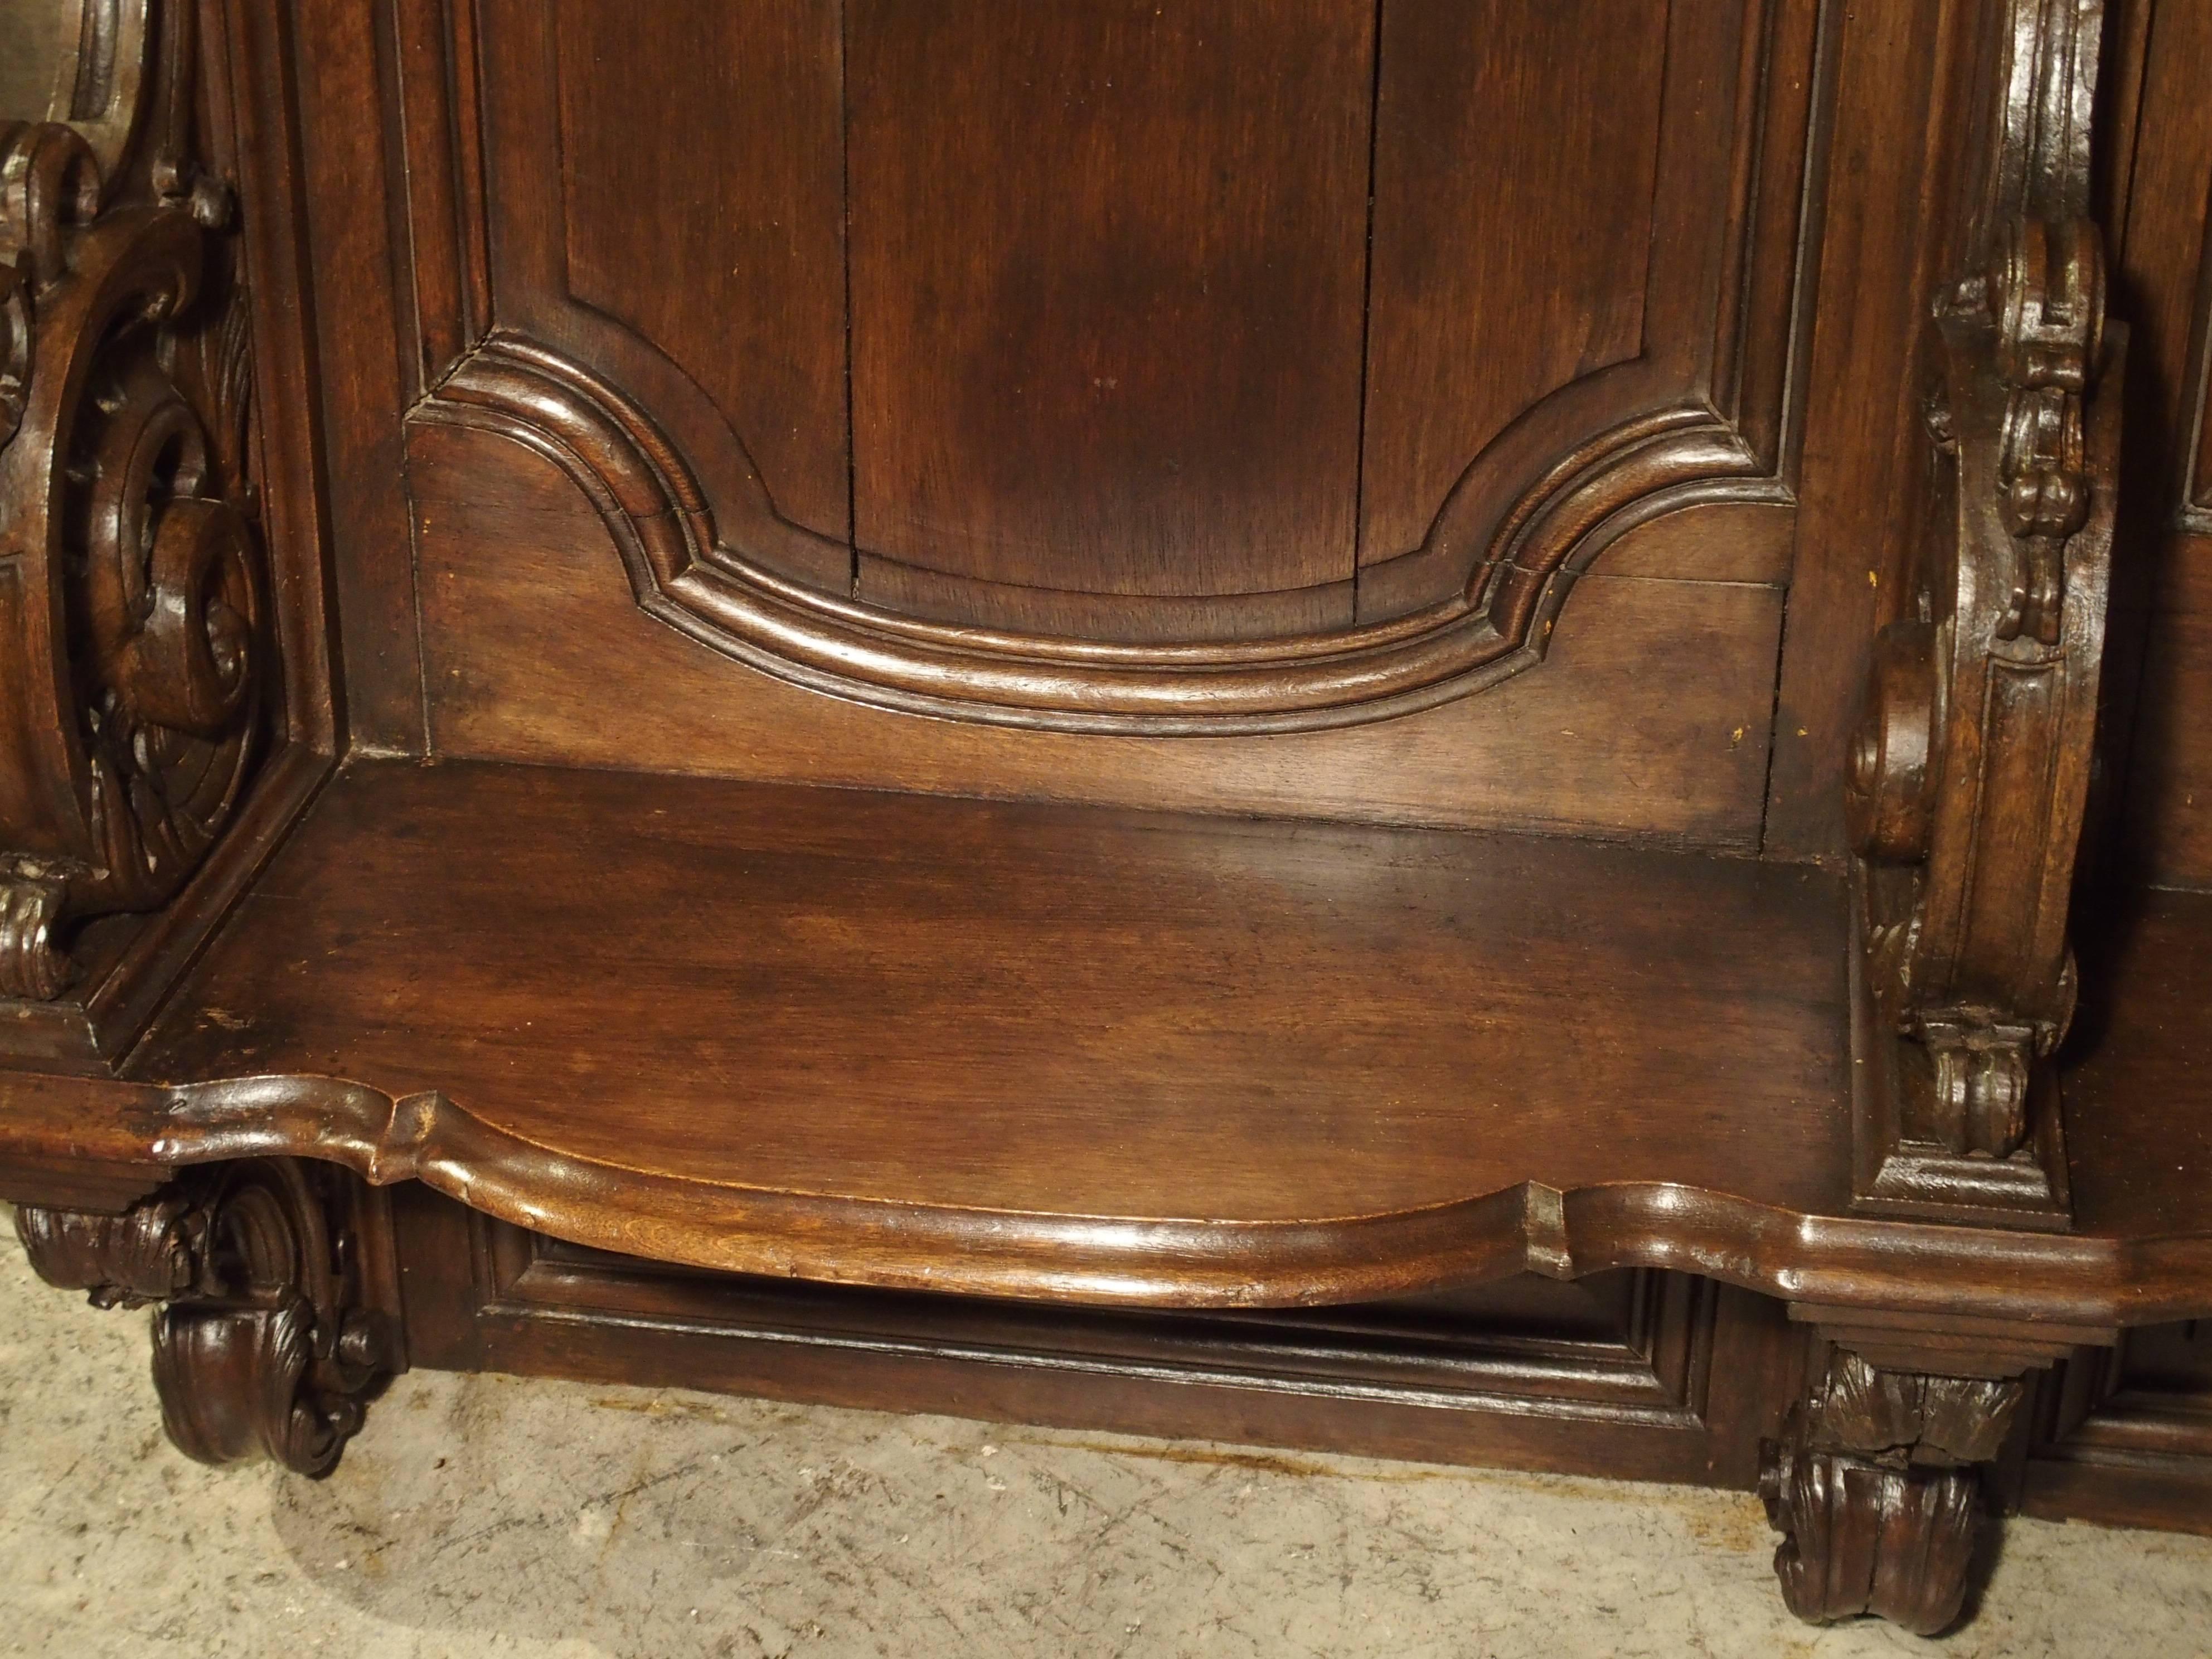 Hand-Carved 19th Century Sculpted Oak Stall from a Private Chapel in Liege, Belgium